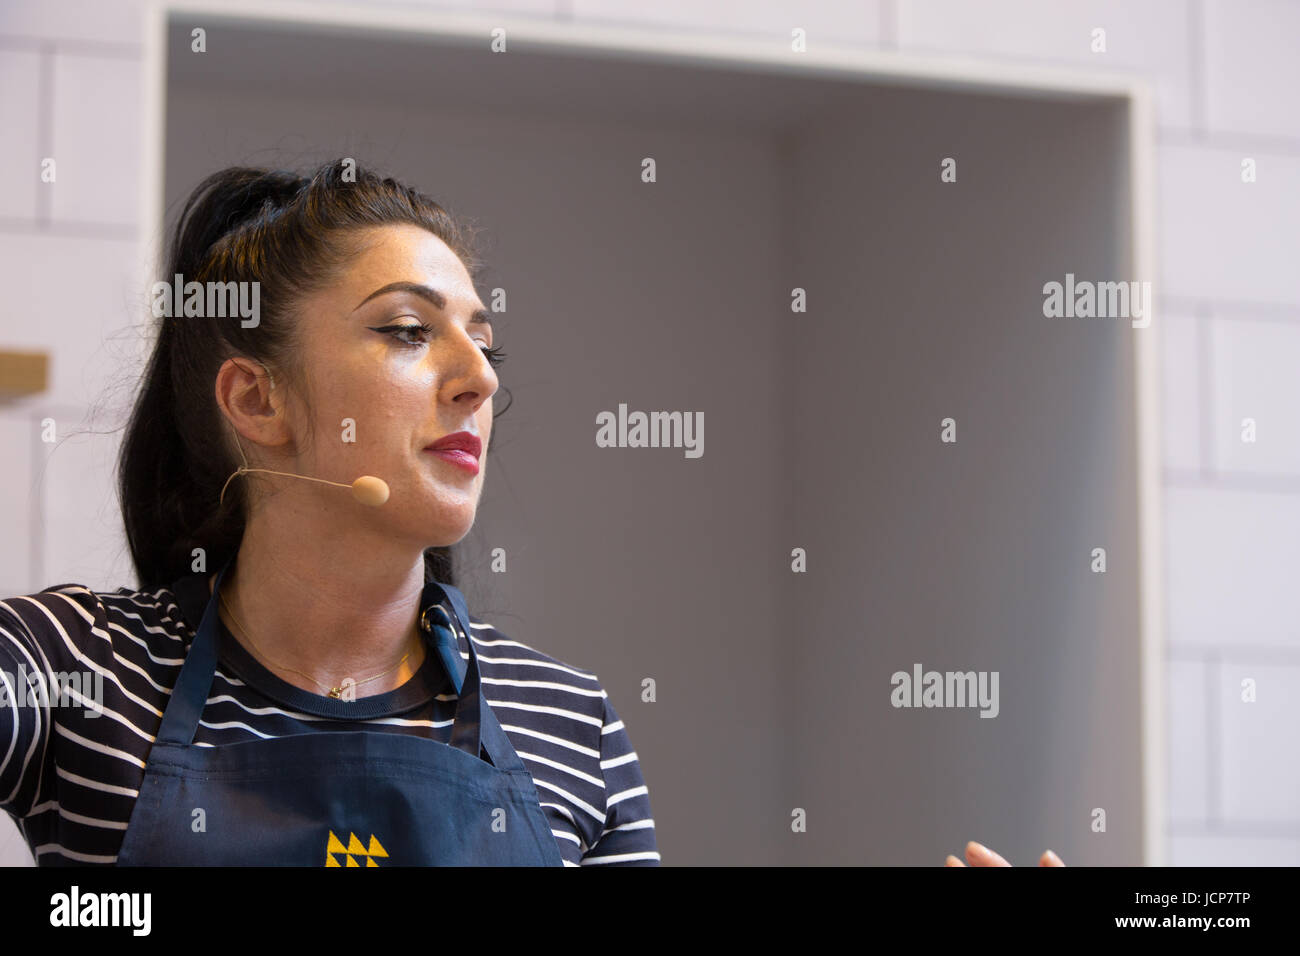 Birmingham, UK. 17th June, 2017. Lakeland baking masterclass with Stacie Stewart a former Masterchef finalist and tv presenter on How to lose Weight Well Credit: steven roe/Alamy Live News Stock Photo